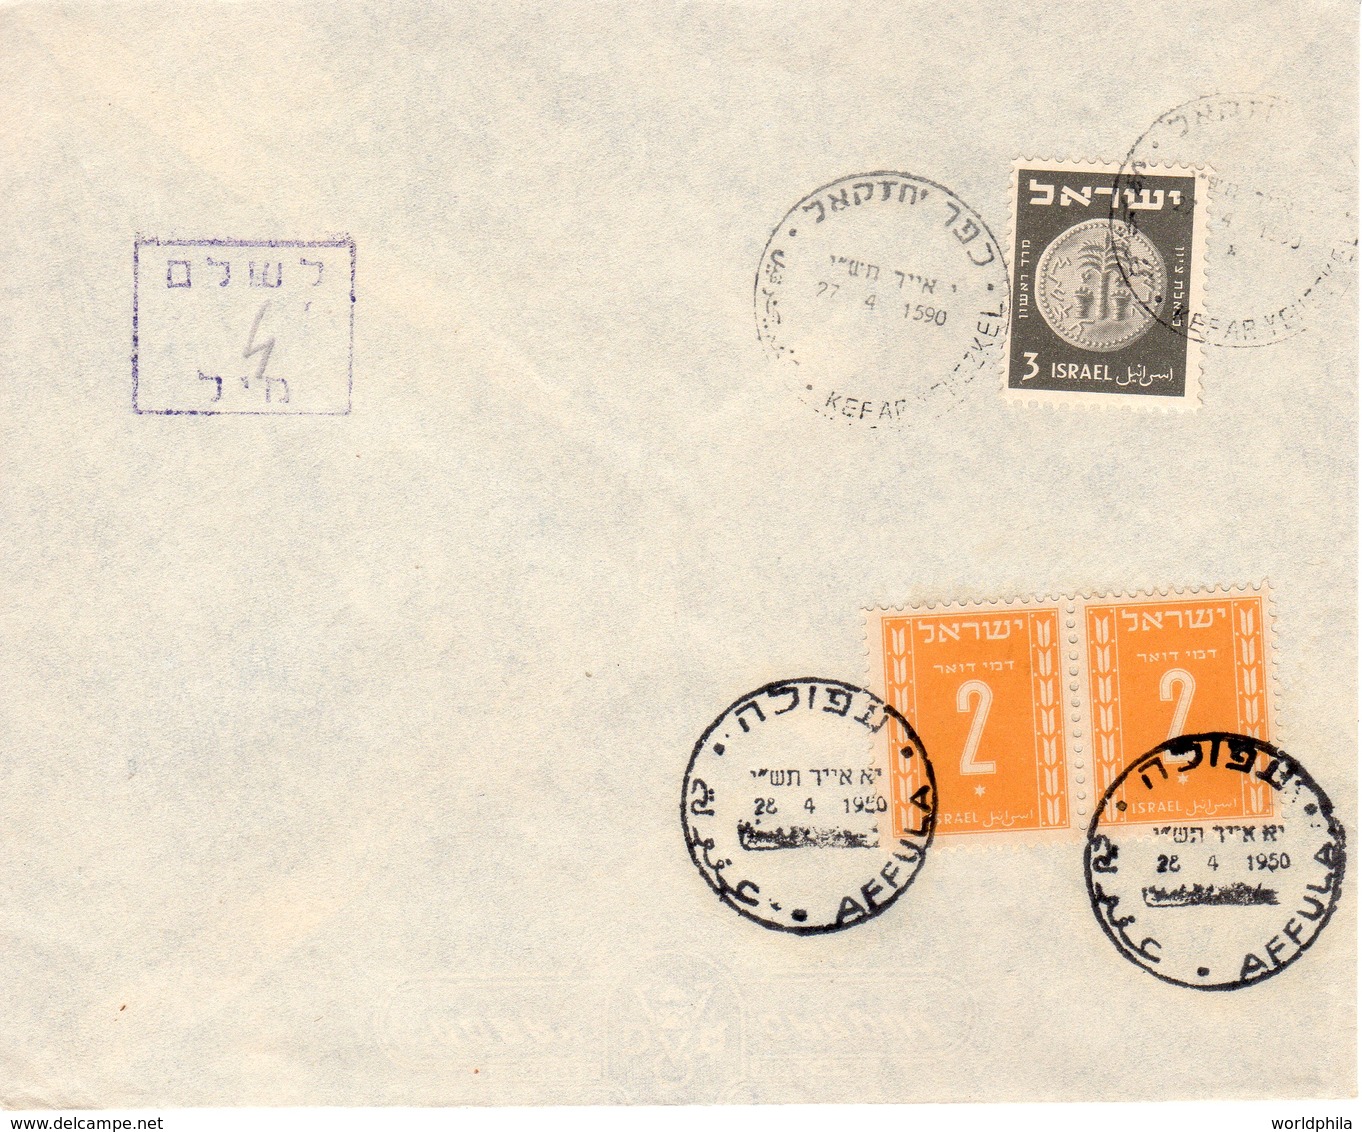 Israel Wrong Date 1590 Instead Of 1950+postage Due Stamps. Philatelic Cover. - Imperforates, Proofs & Errors